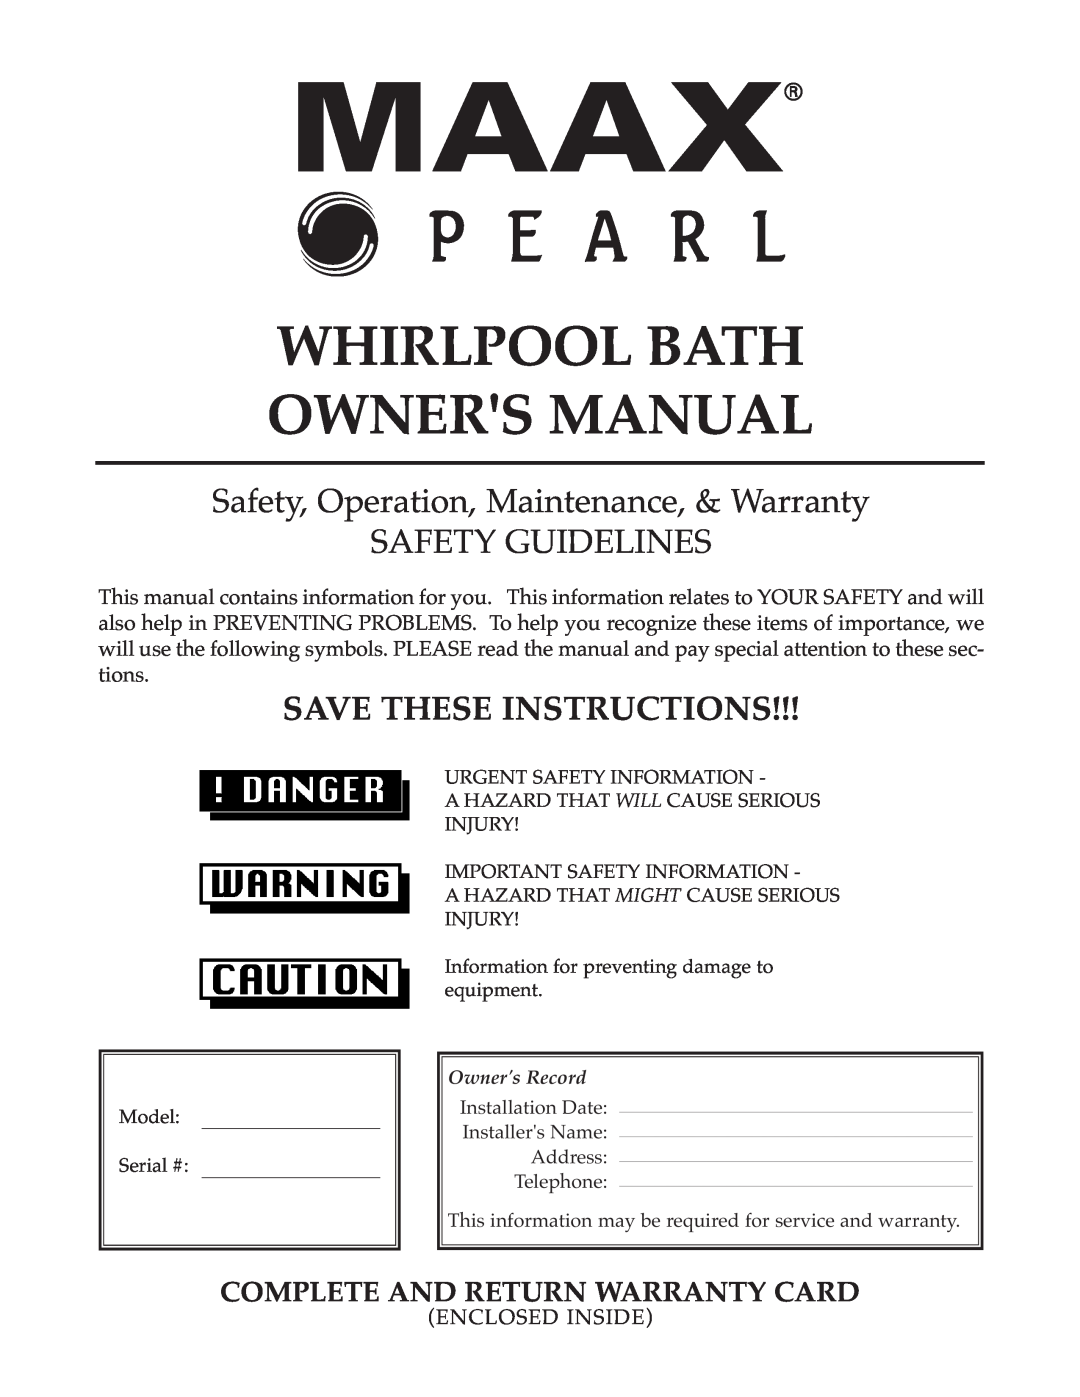 Whirlpool Hot Tub owner manual Save These Instructions, Safety, Operation, Maintenance, & Warranty SAFETY GUIDELINES 